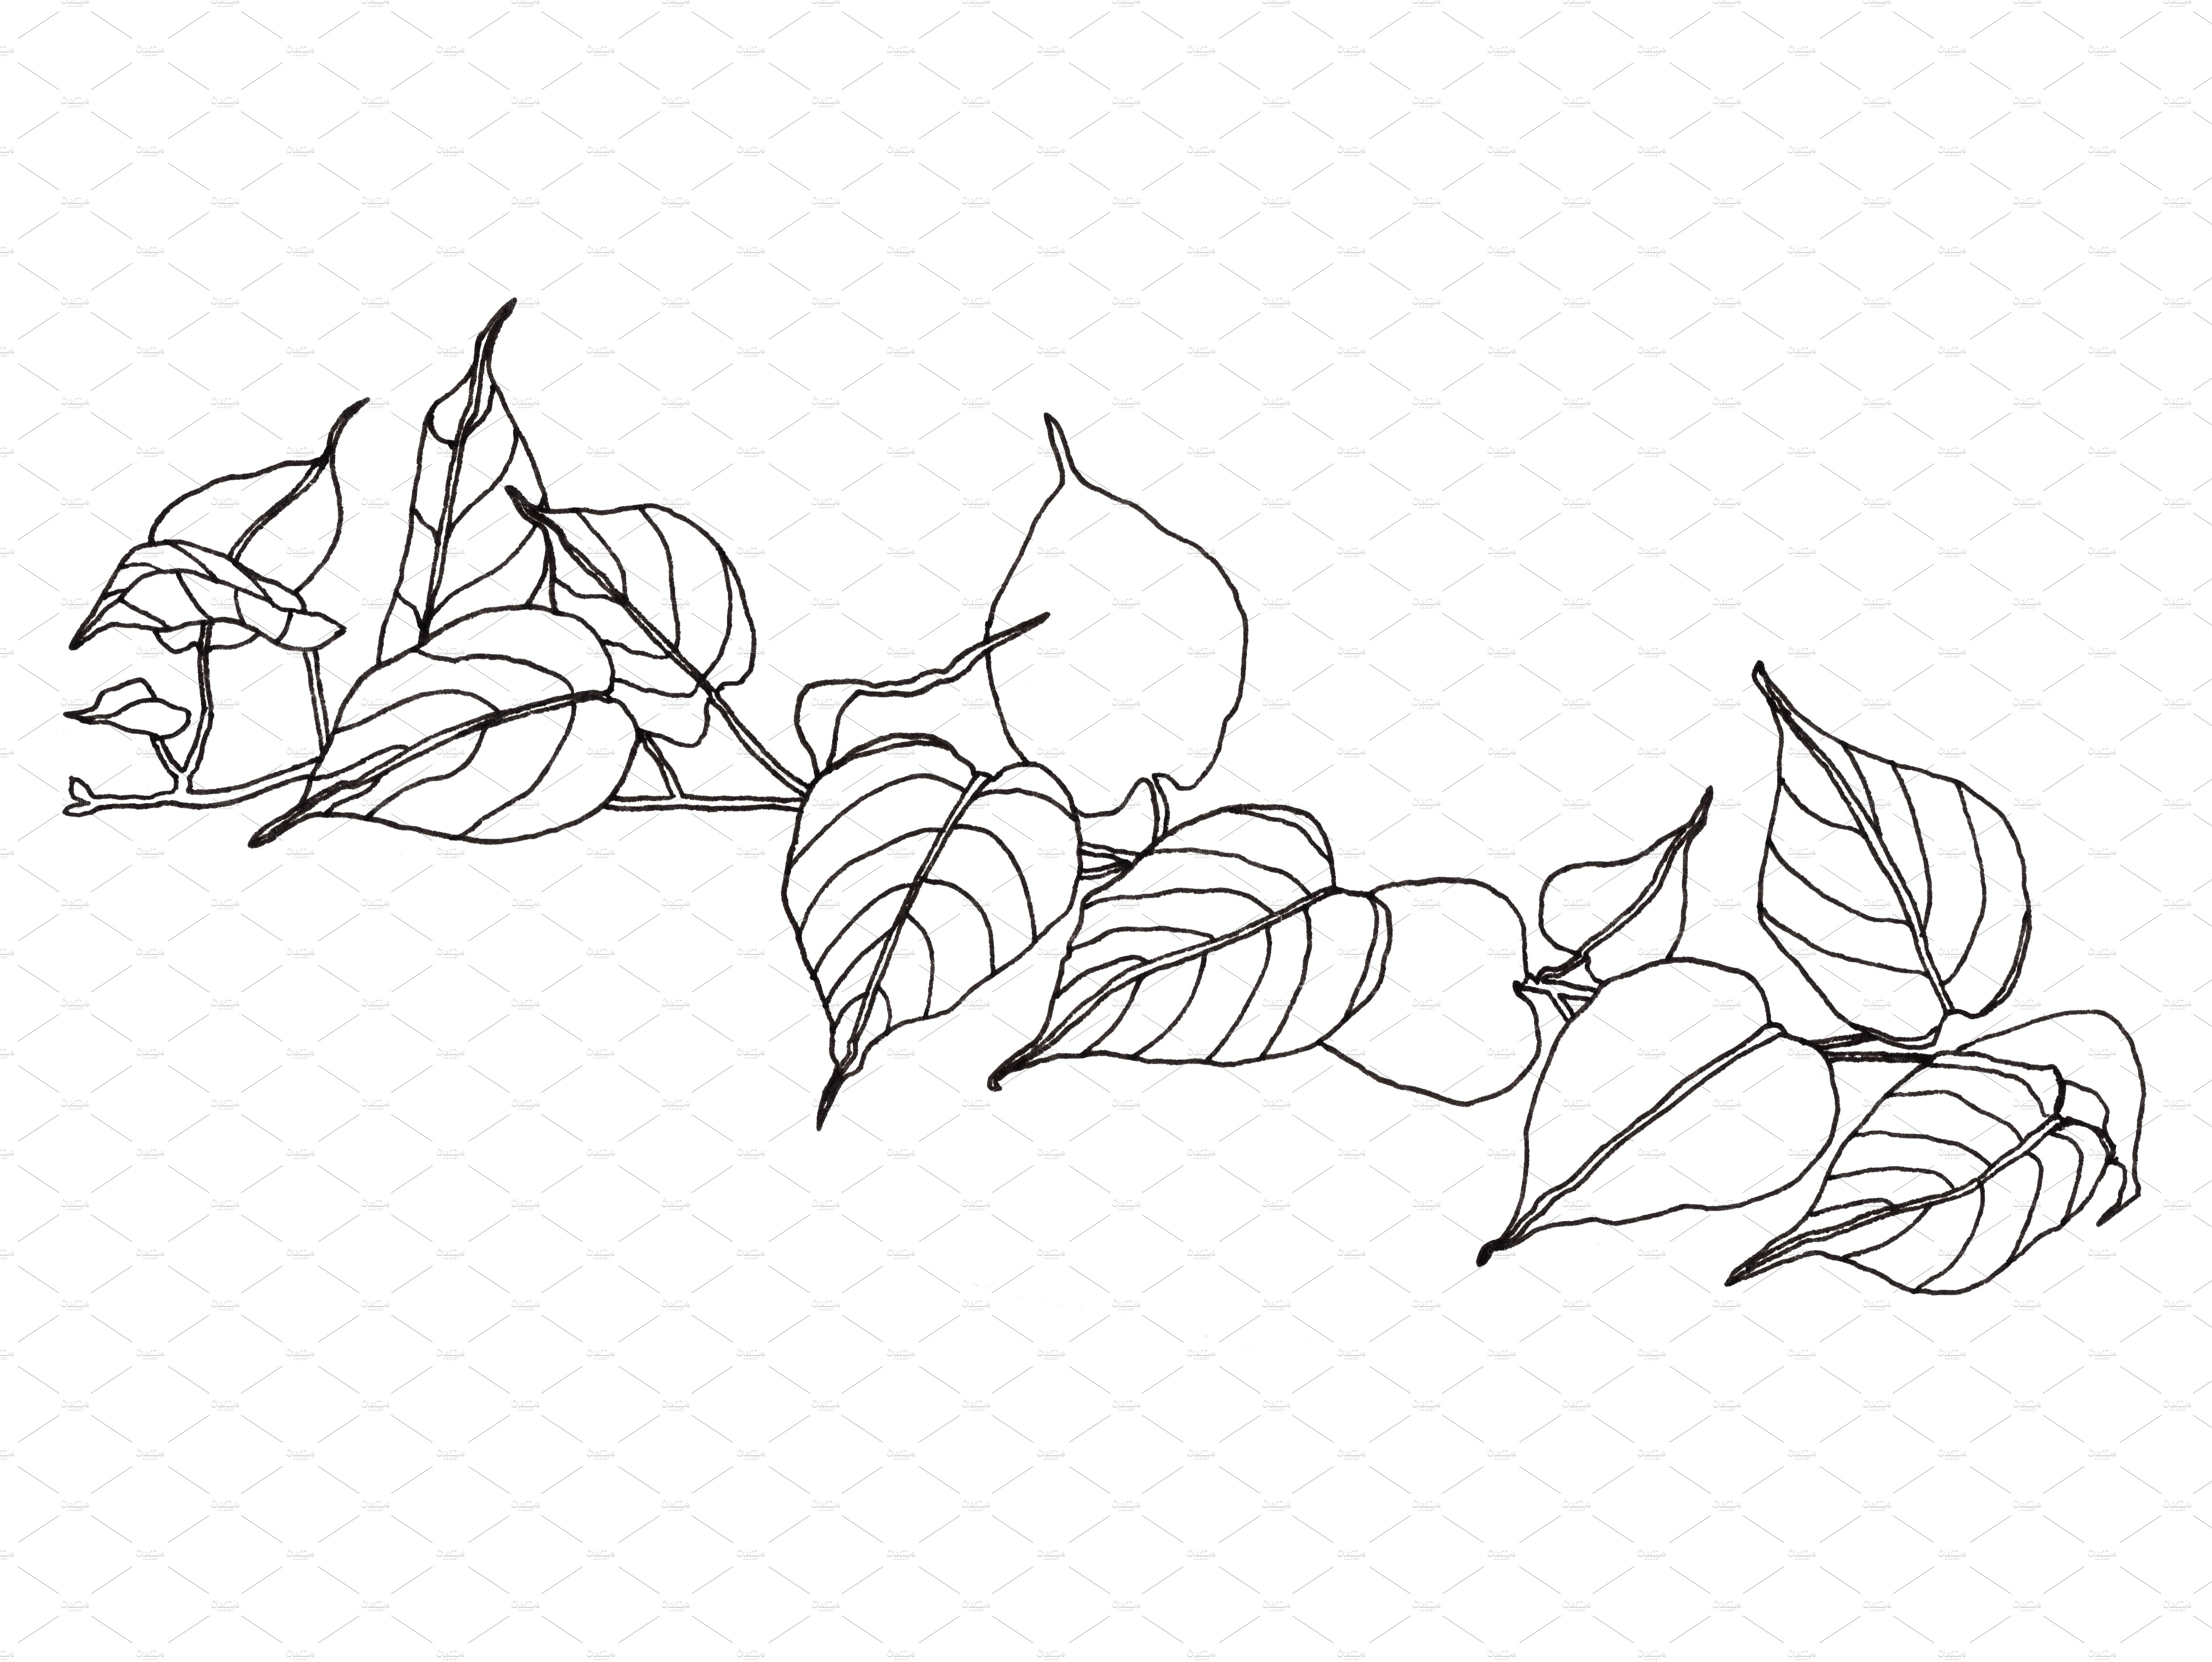 Black and white drawing of a branch with leaves.